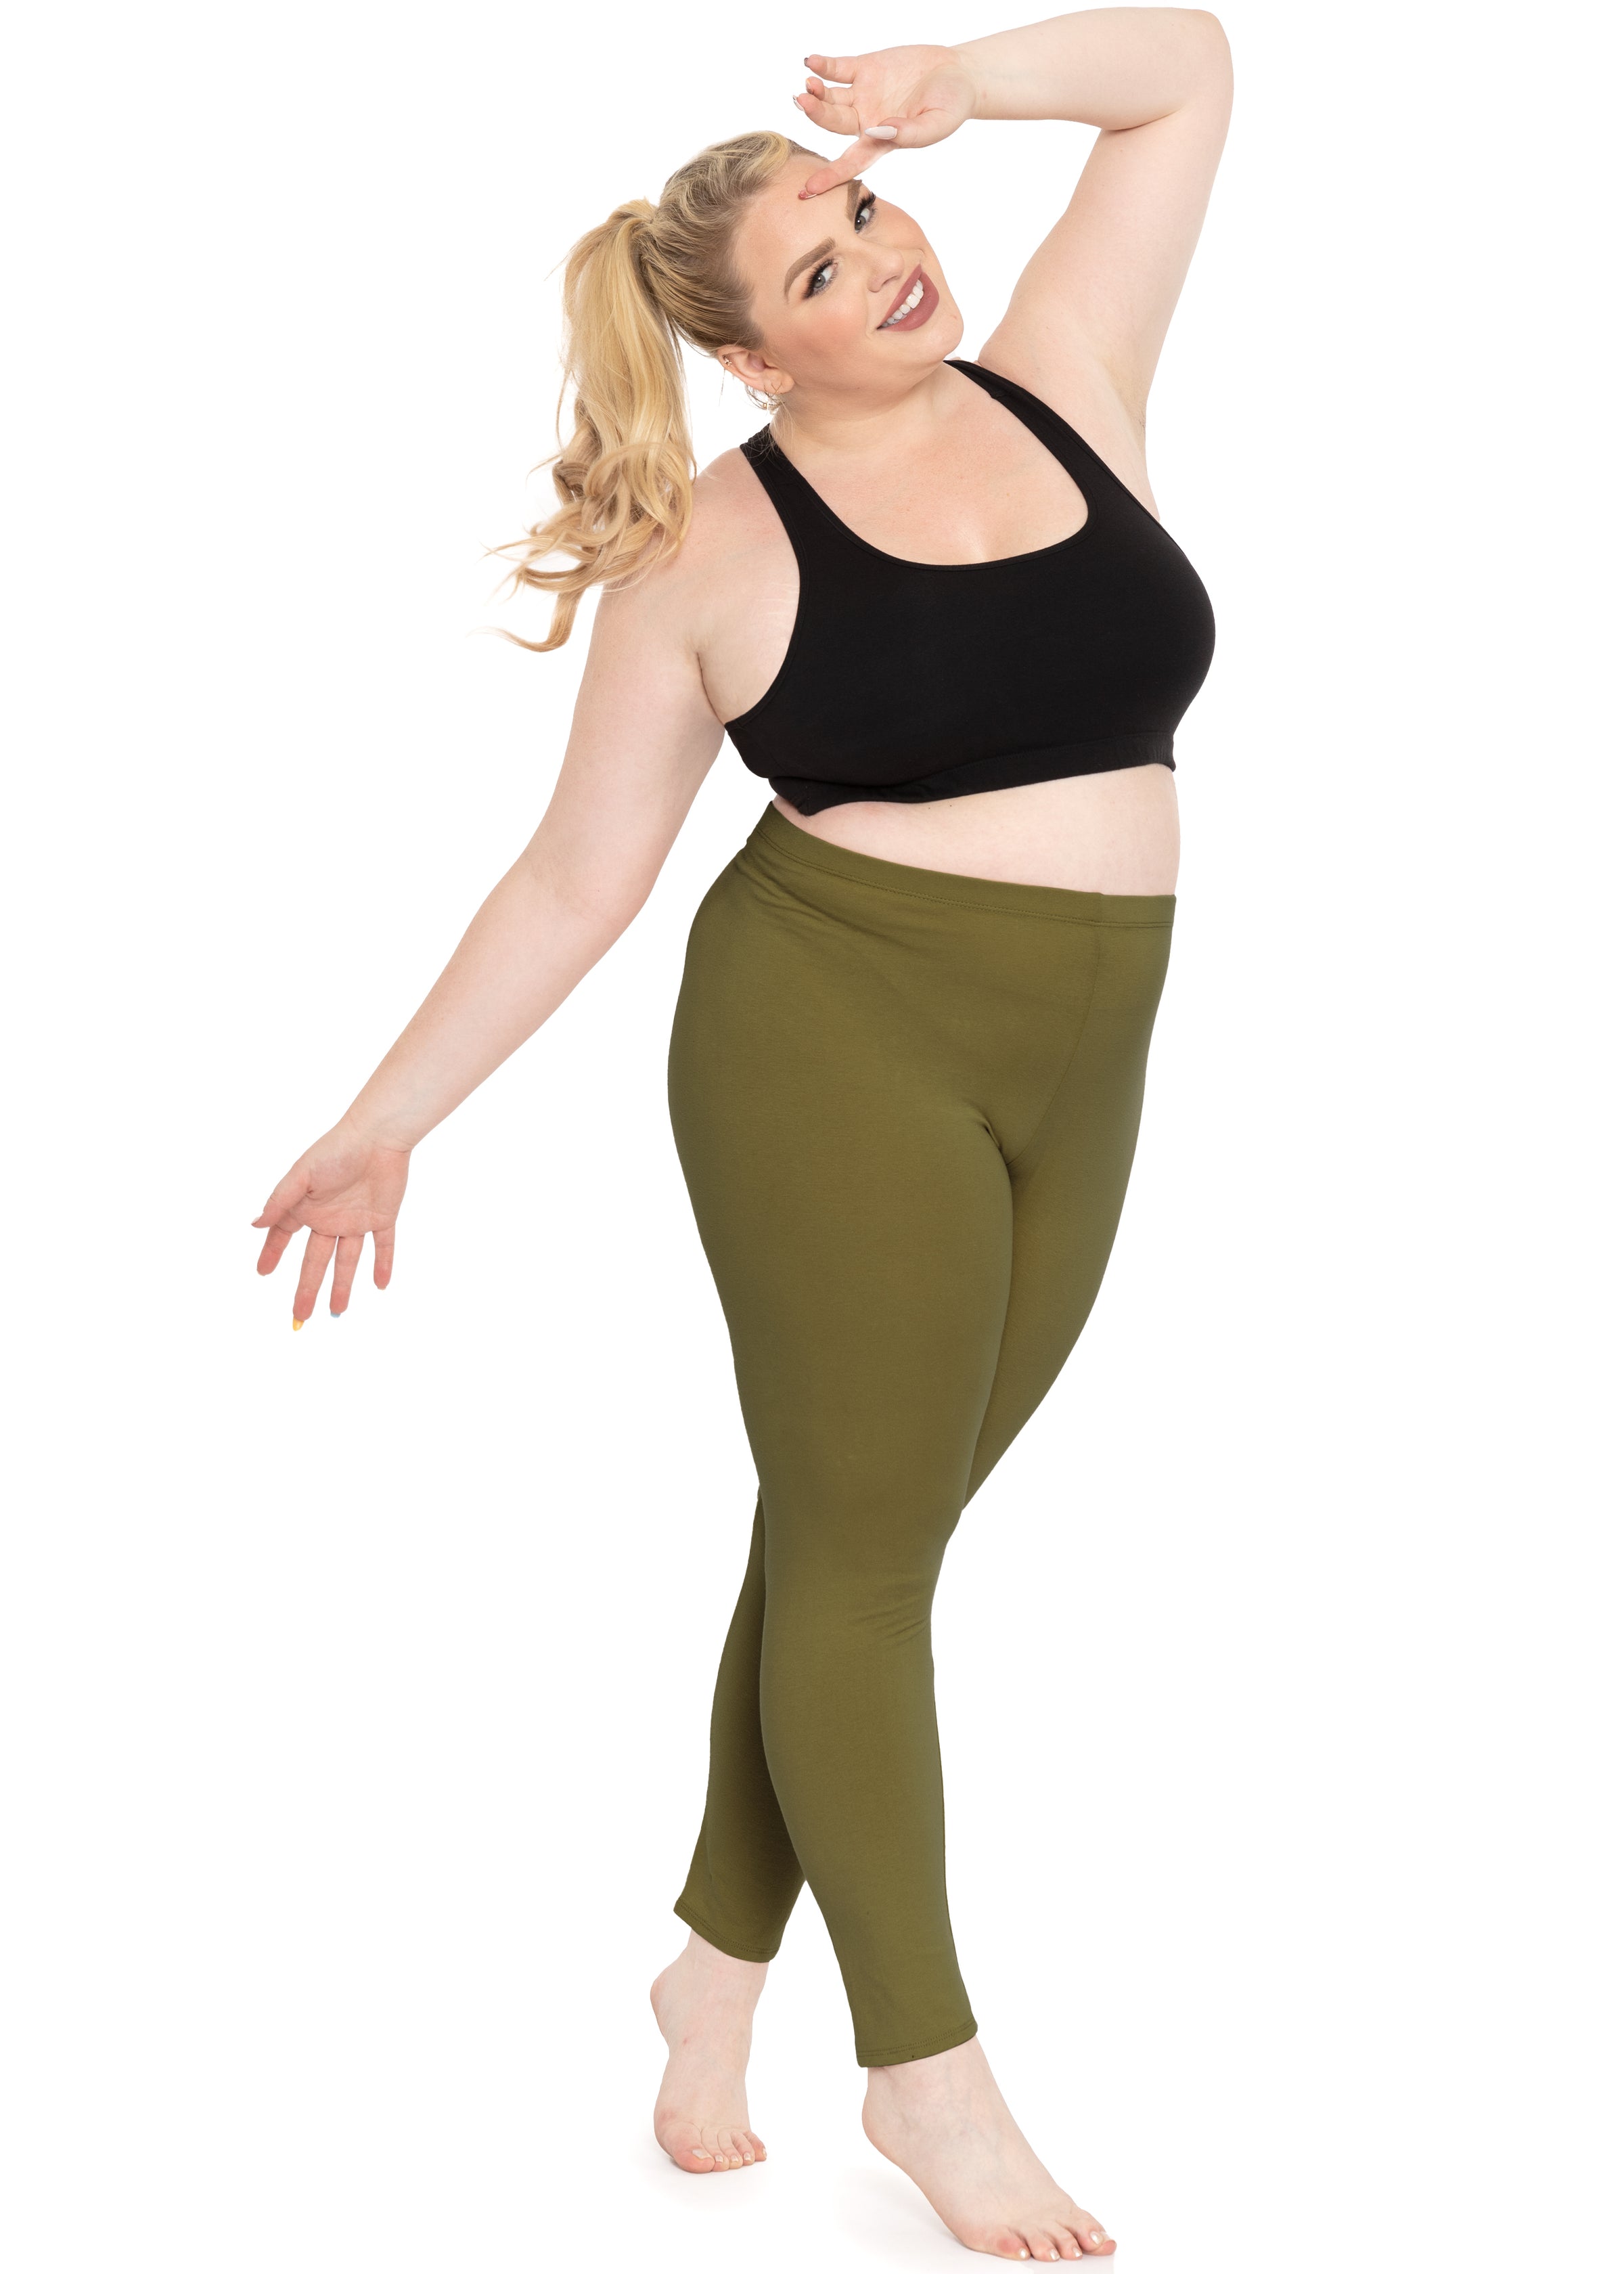 STRETCH IS COMFORT Women's Plus Size Knee and Full Length Leggings